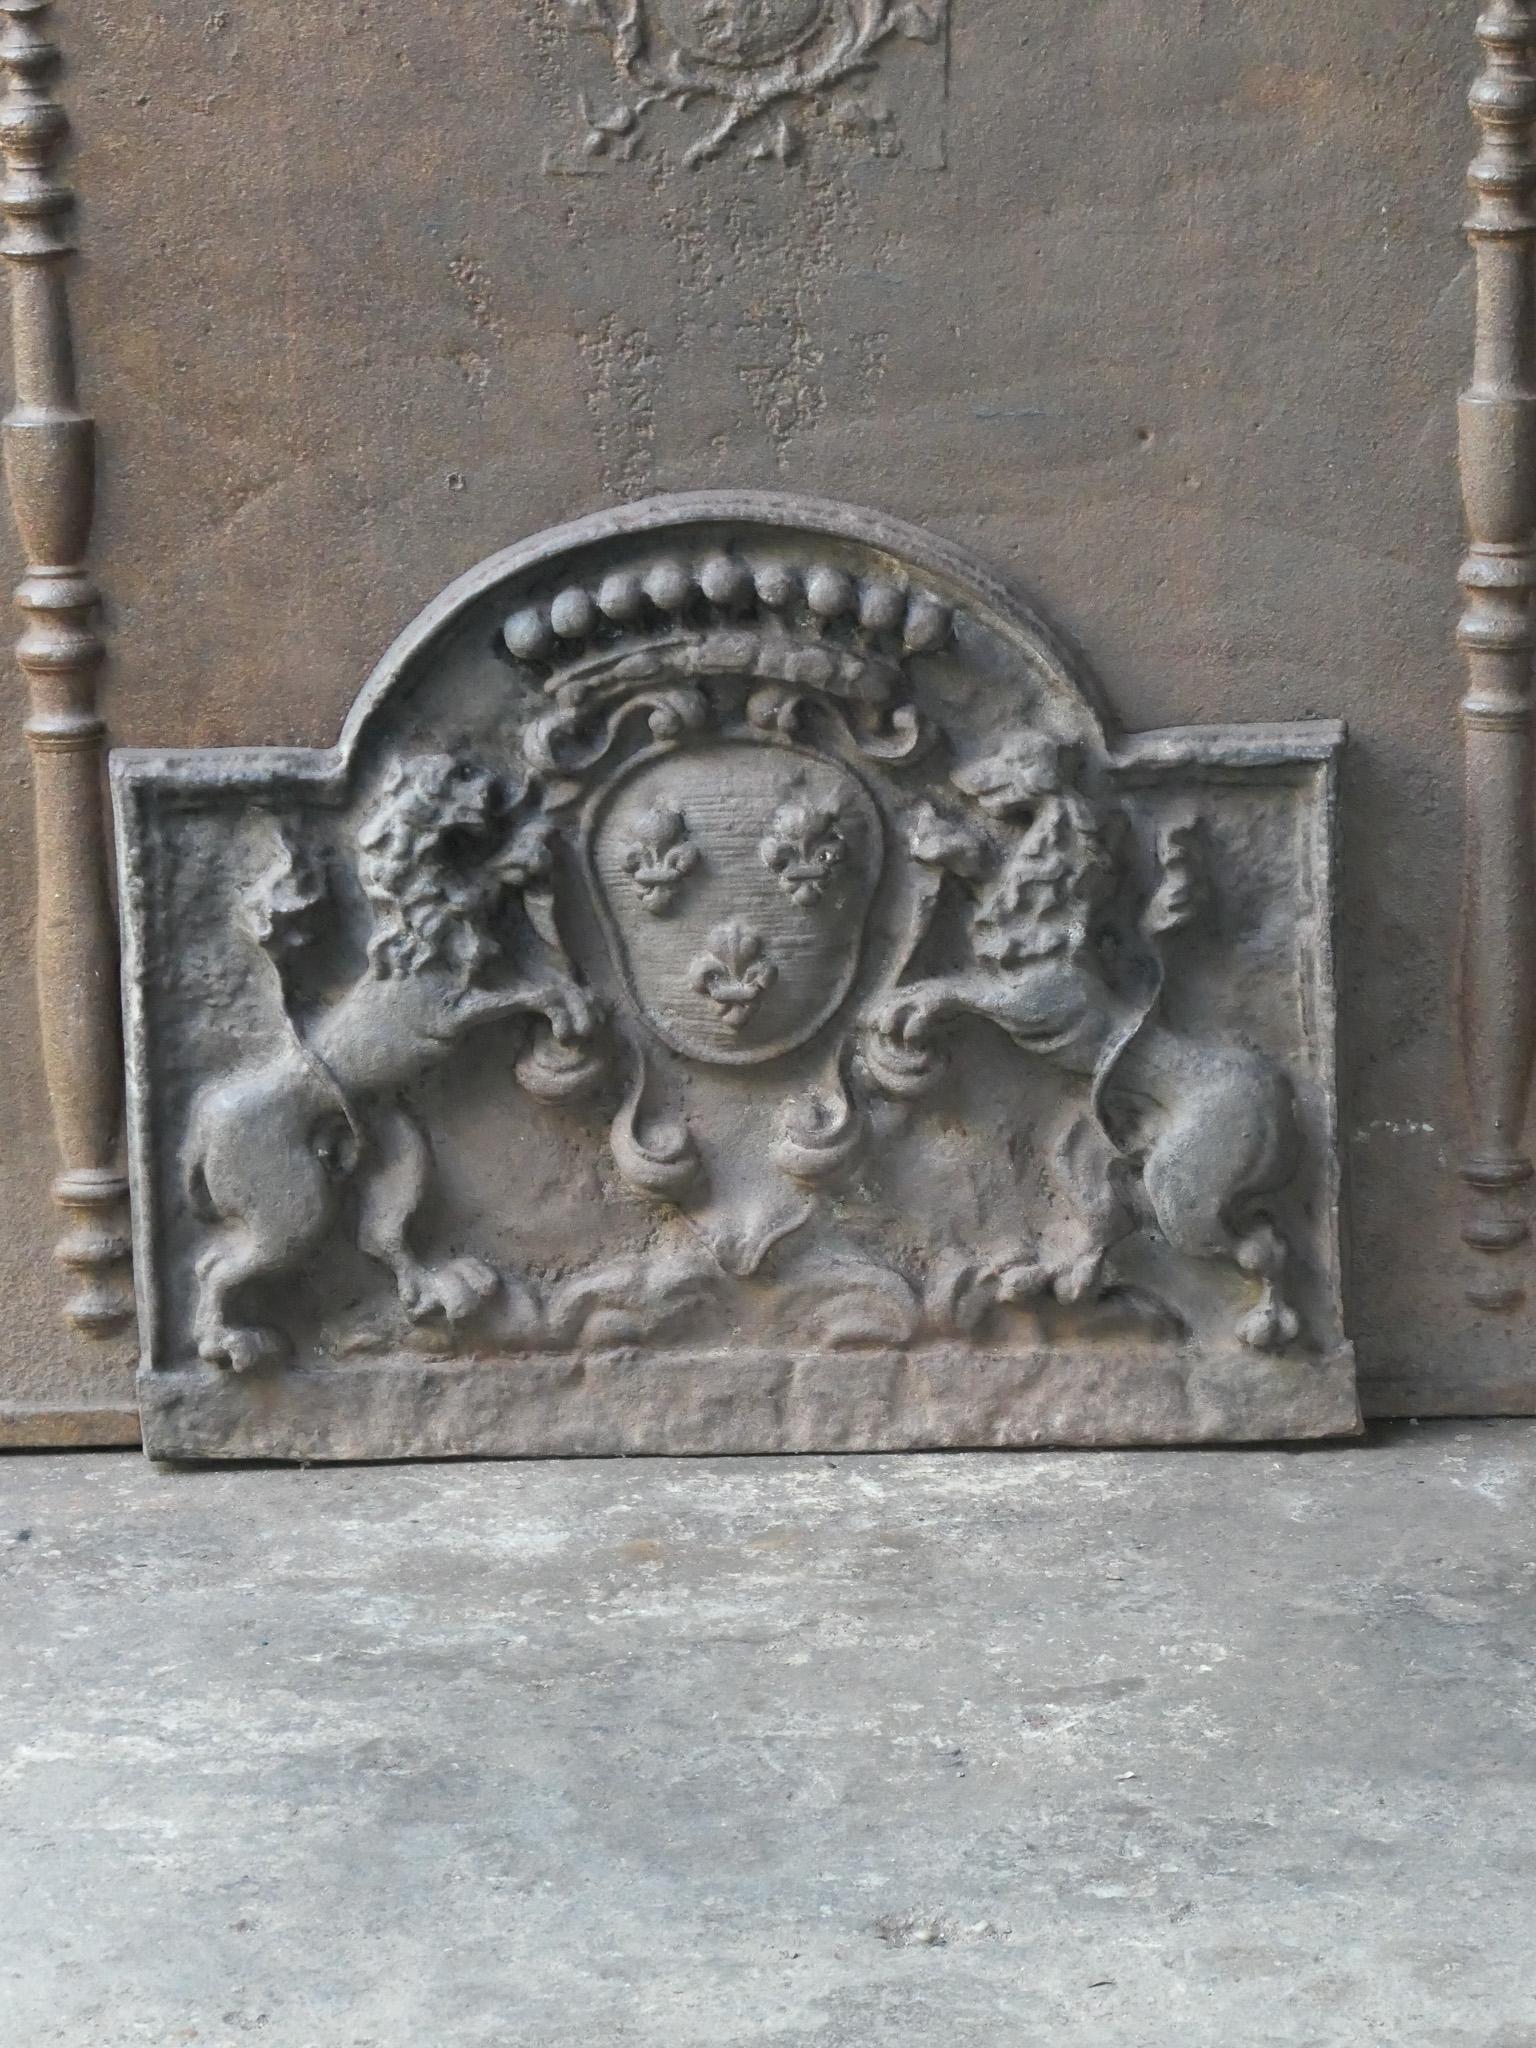 20th century French Louis XIV style fireback with the Arms of France. A coat of arms of the House of Bourbon, an originally French royal house that became a major dynasty in Europe. The house delivered kings for Spain (Navarra), France, both